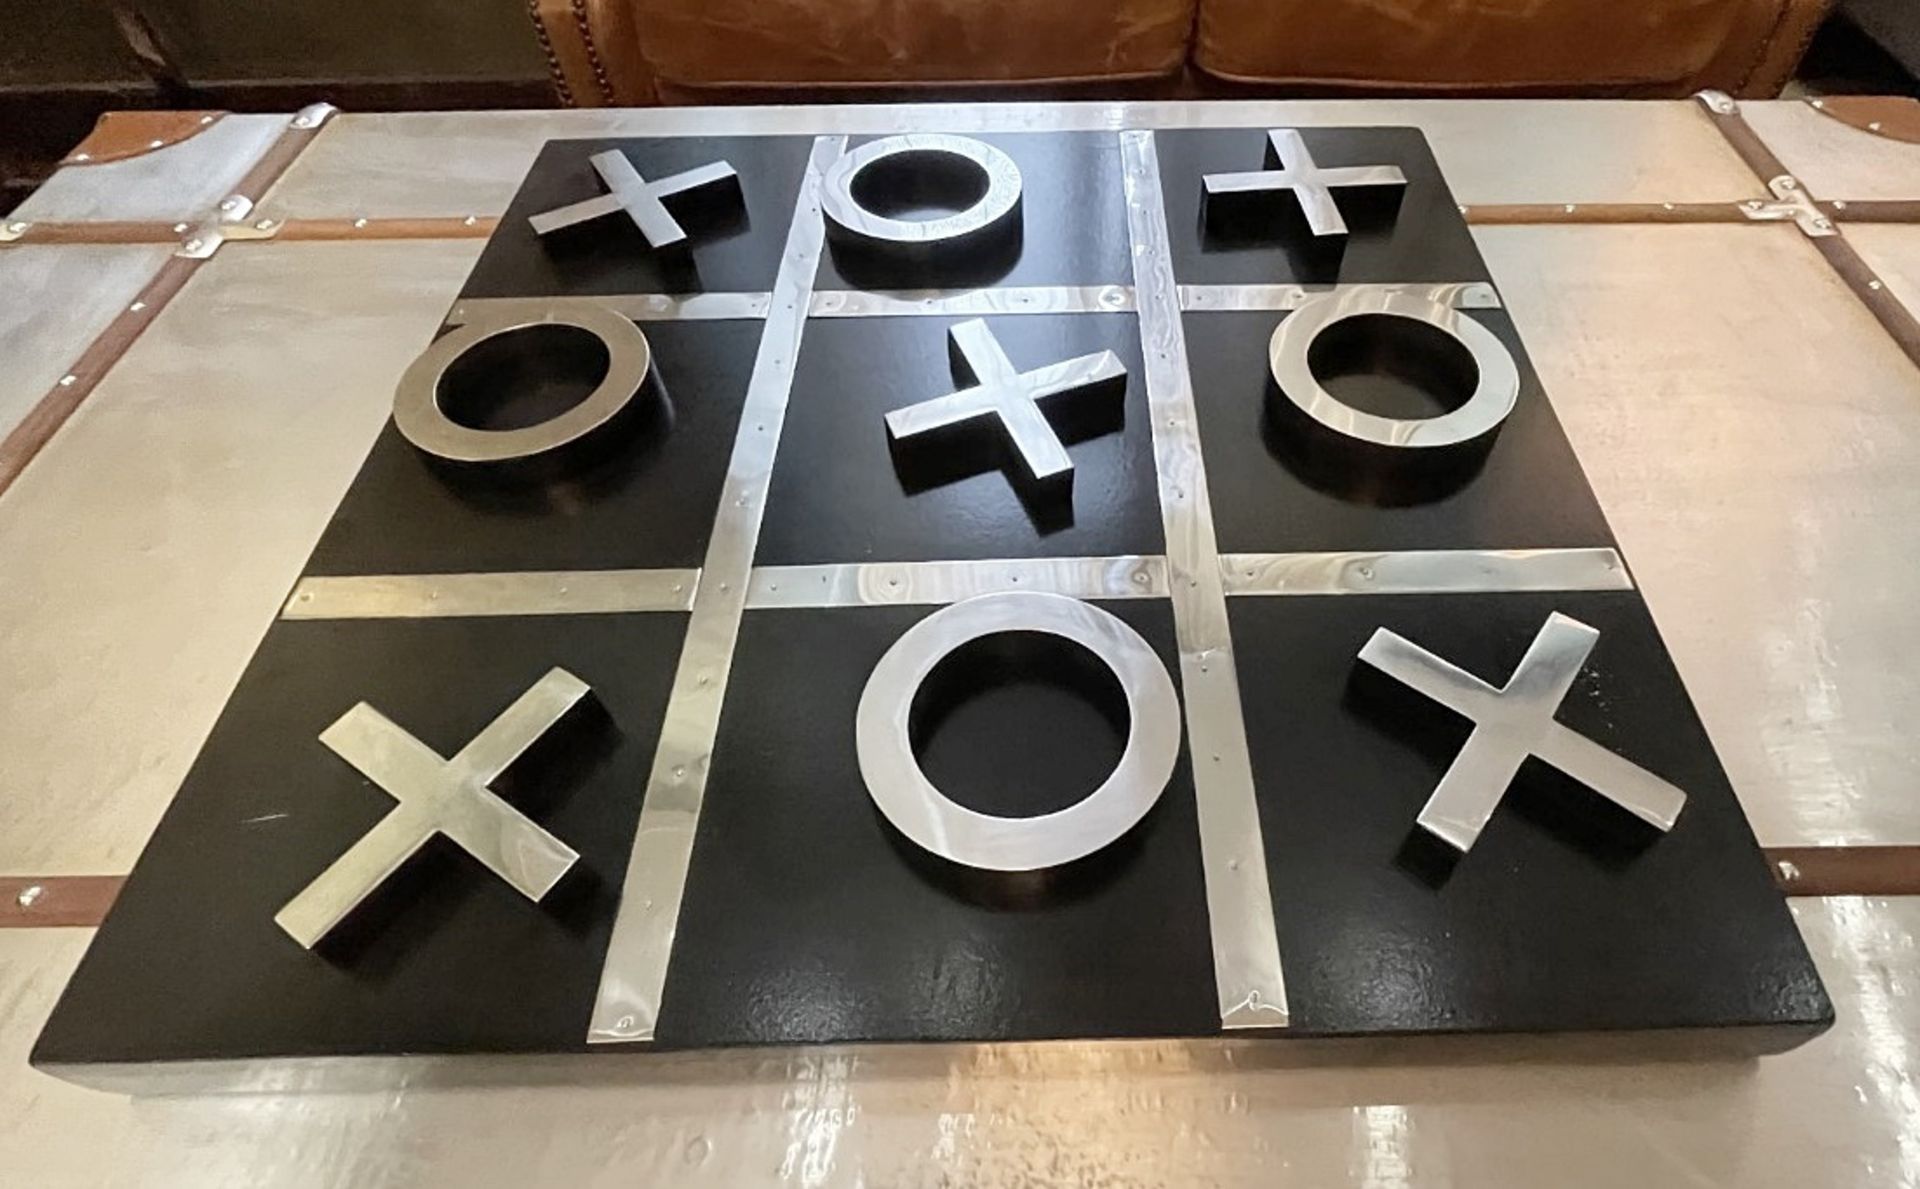 1 x Premium Noughts & Crosses Game Set - Recently Removed from a Luxury Furniture Retailer in Black - Image 2 of 3